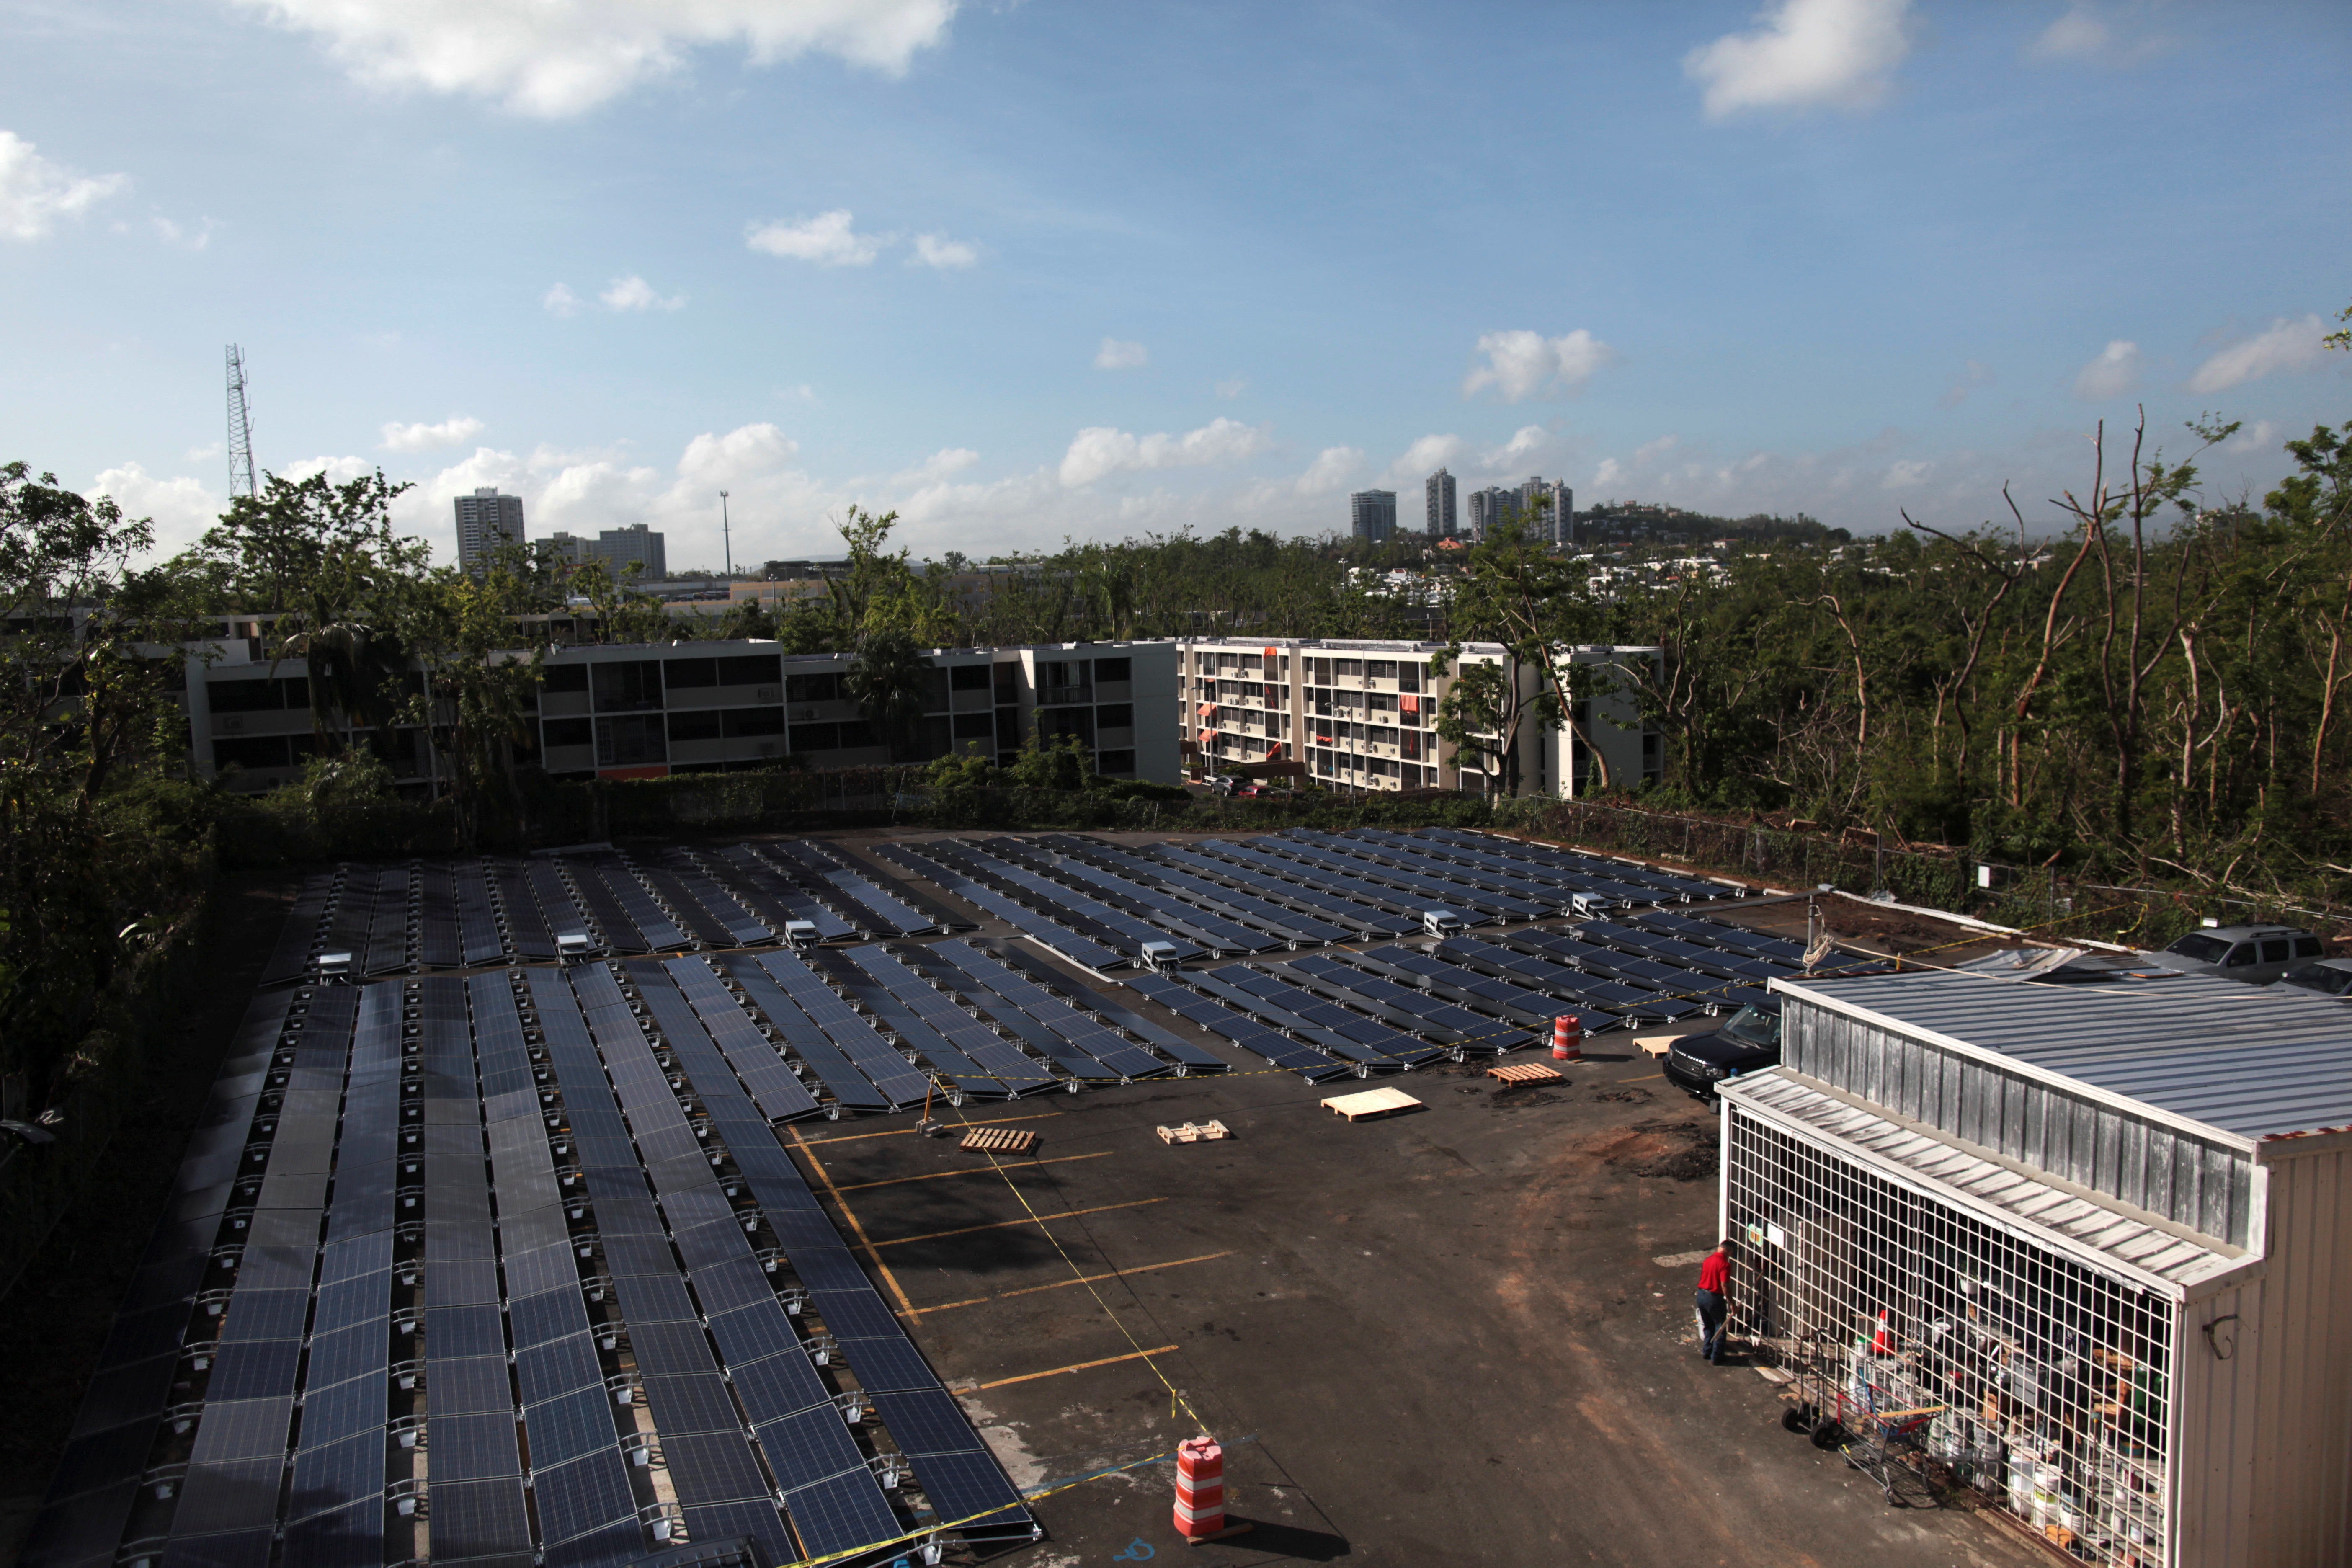 Solar panels set up at the San Juan Children's Hospital in Puerto Rico, after the island was hit by Hurricane Maria in September 2017. REUTERS/Alvin Baez 